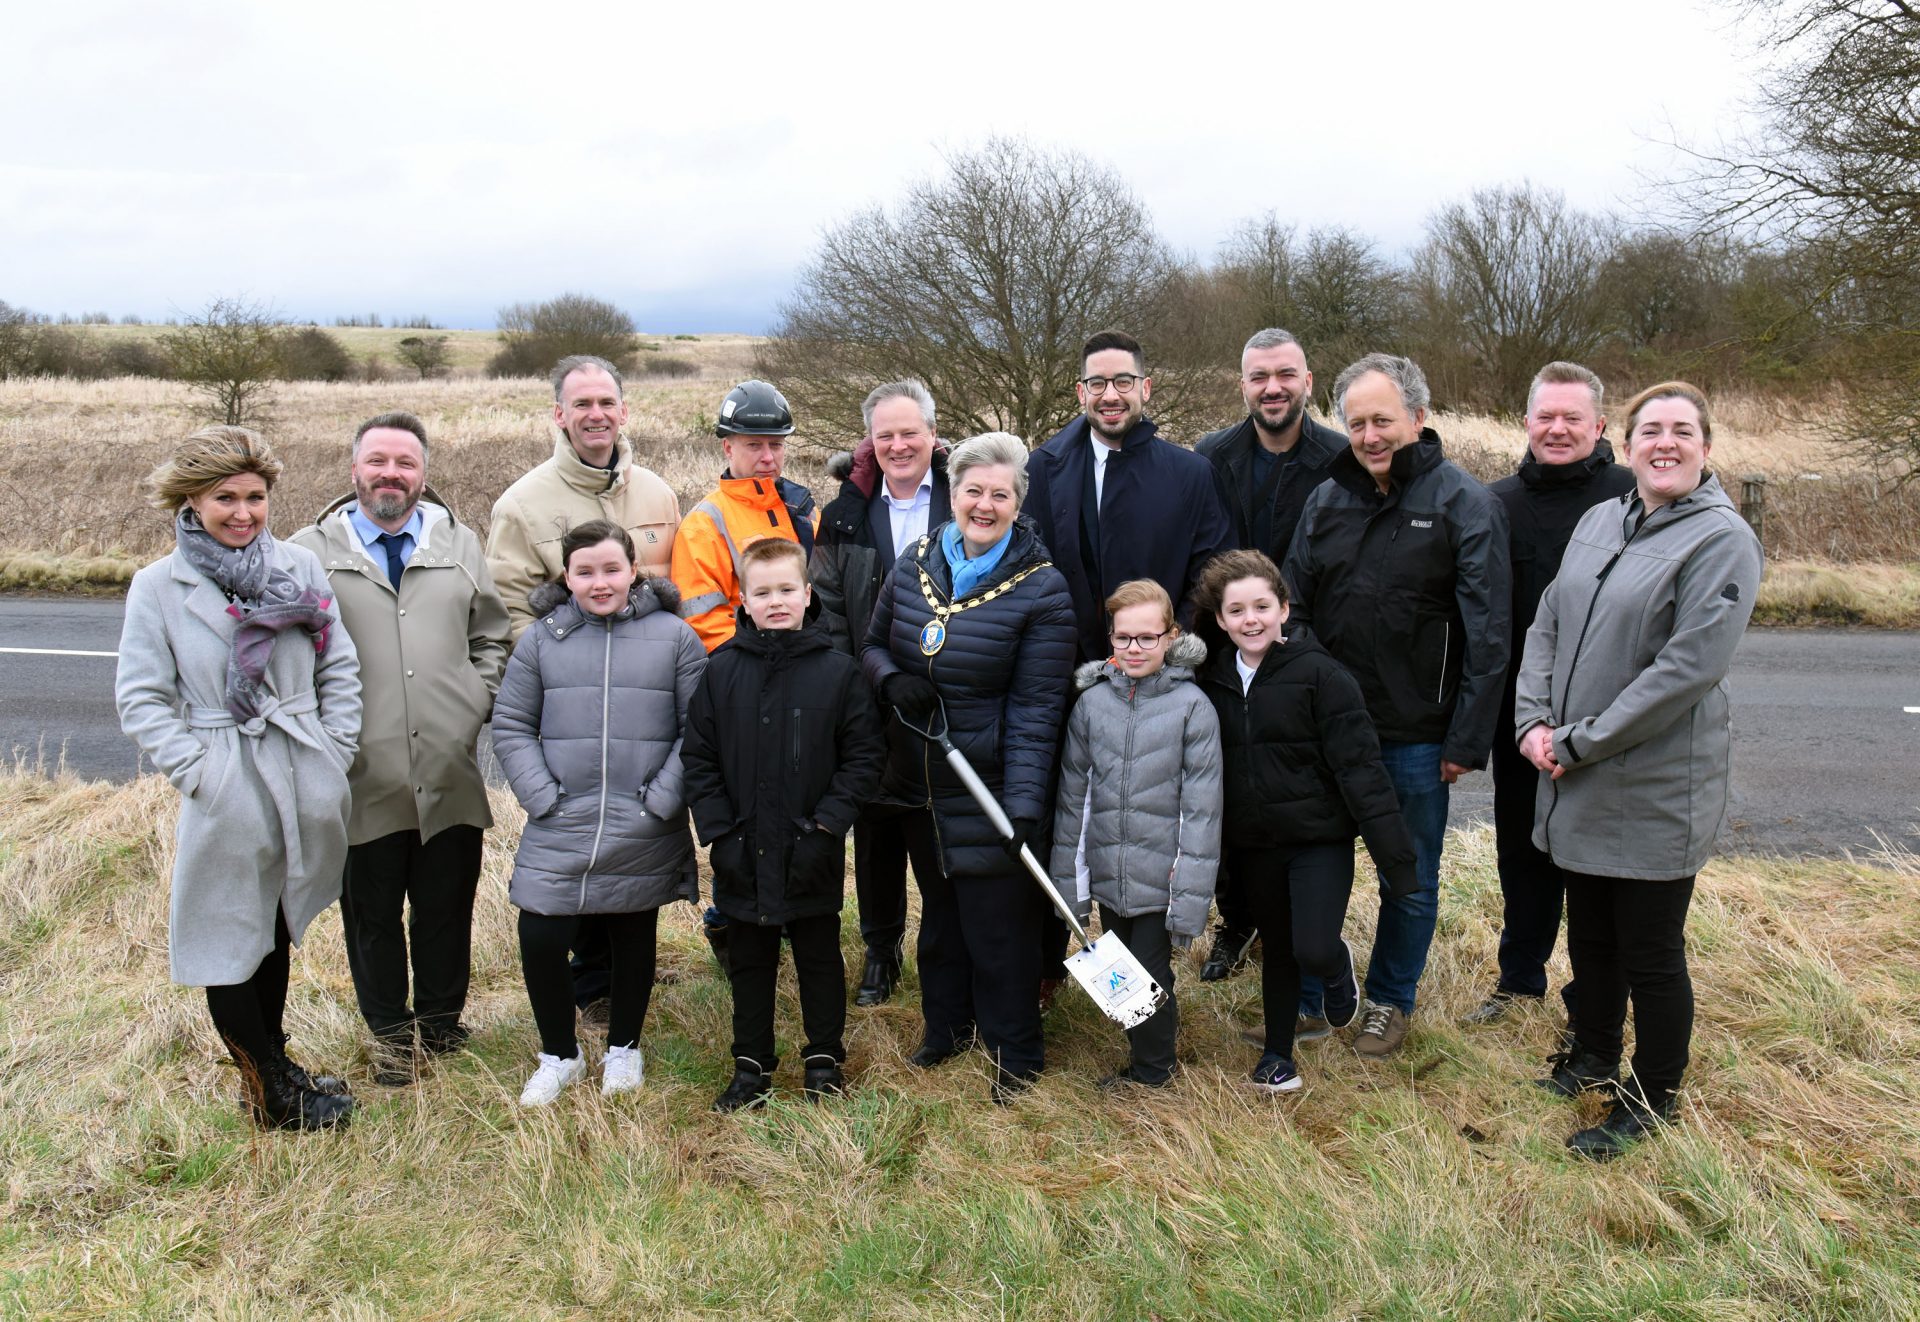 Image shows attendees at groundbreaking celebration for North Ayrshire Council's first Solar PV Farm